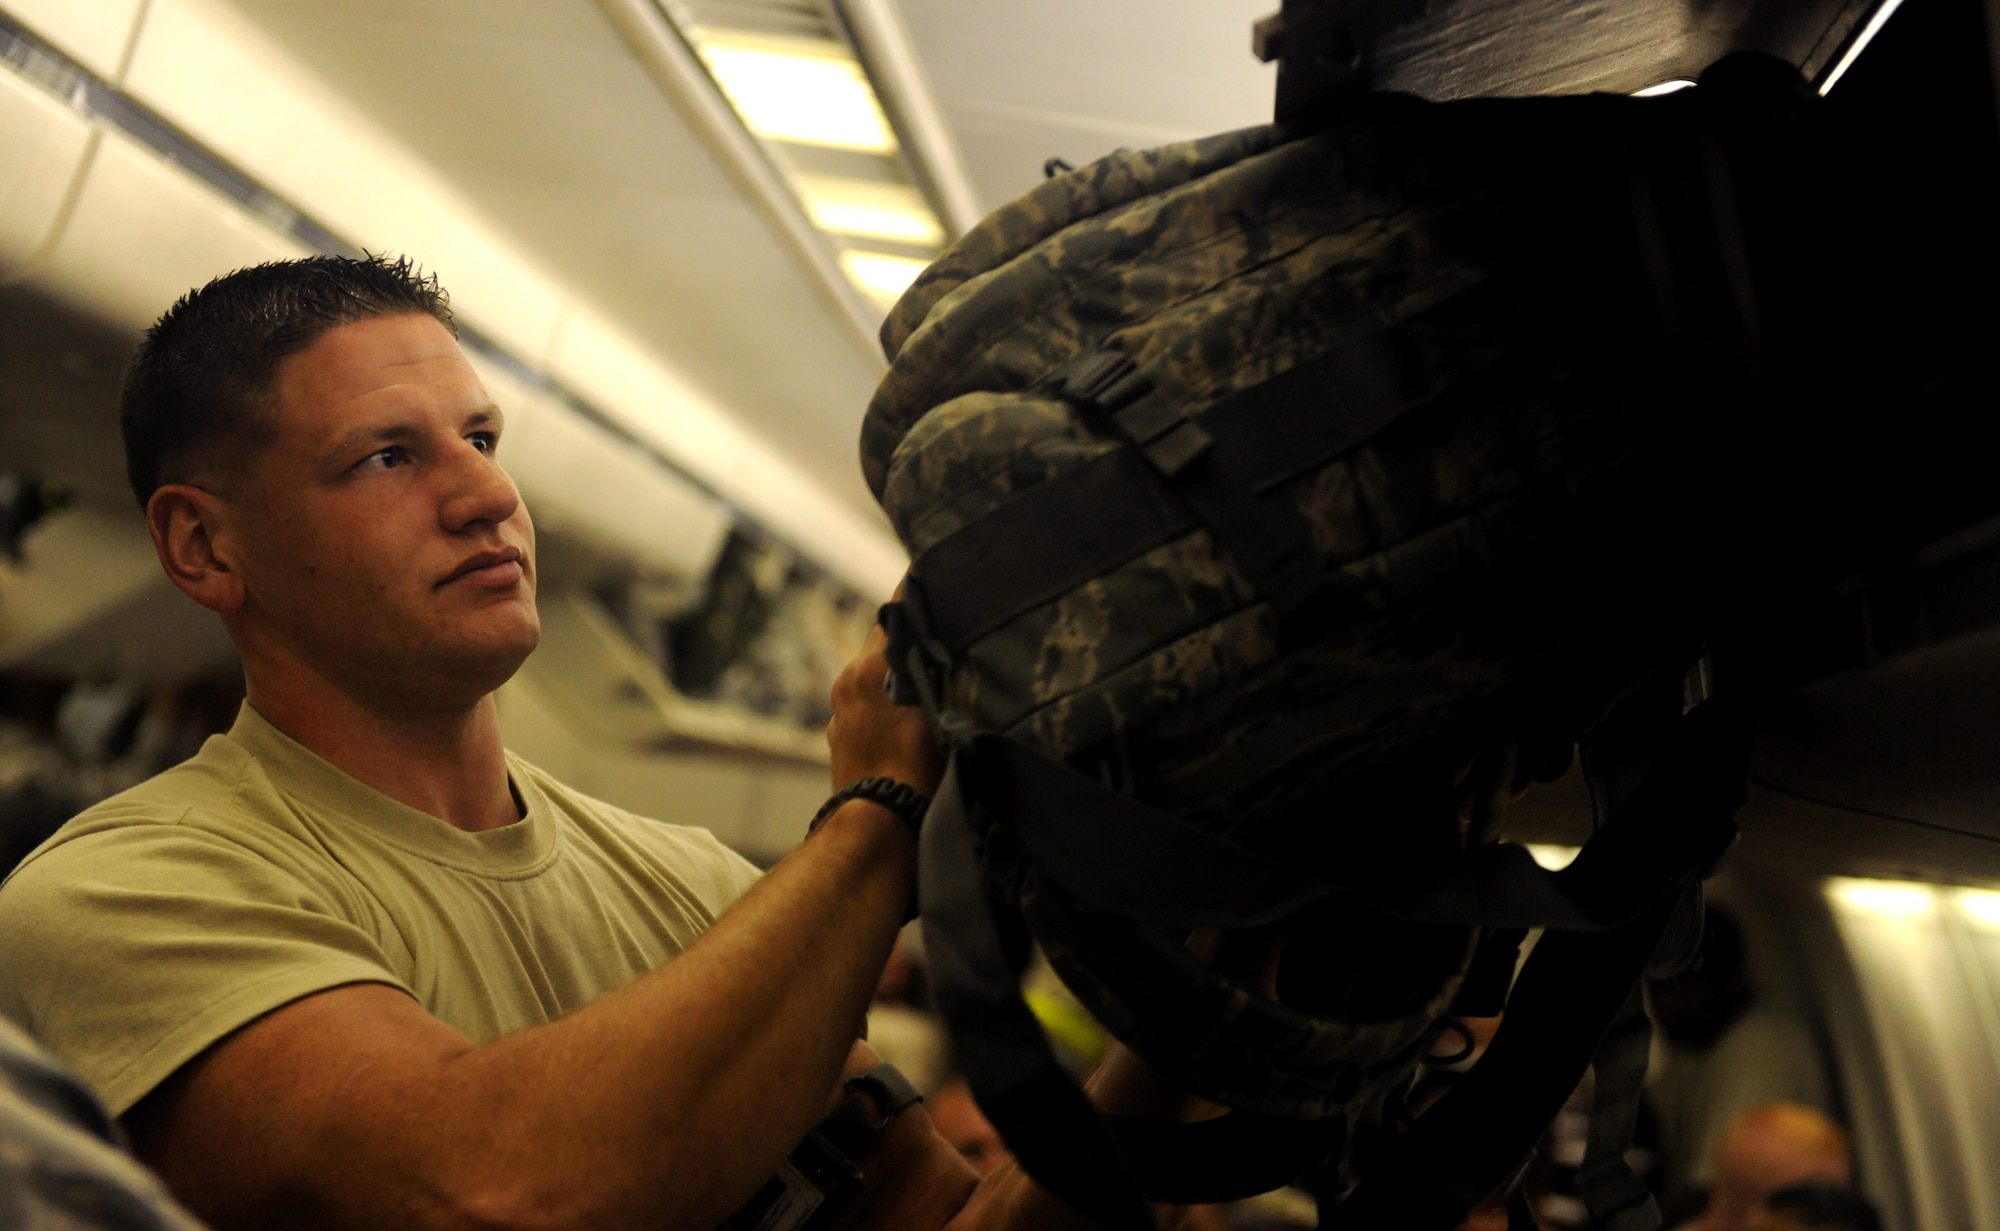 MOODY AIR FORCE BASE, Ga. -- Senior Airman William Beard, 23rd Aircraft Maintenance Squadron ammunitions loader, stuffs his bag into an overhead compartment here. Once all the personnel were on board, the aircraft departed to Afghanistan for deployment. (U.S. Air Force photo/Airman 1st Class Benjamin Wiseman)






